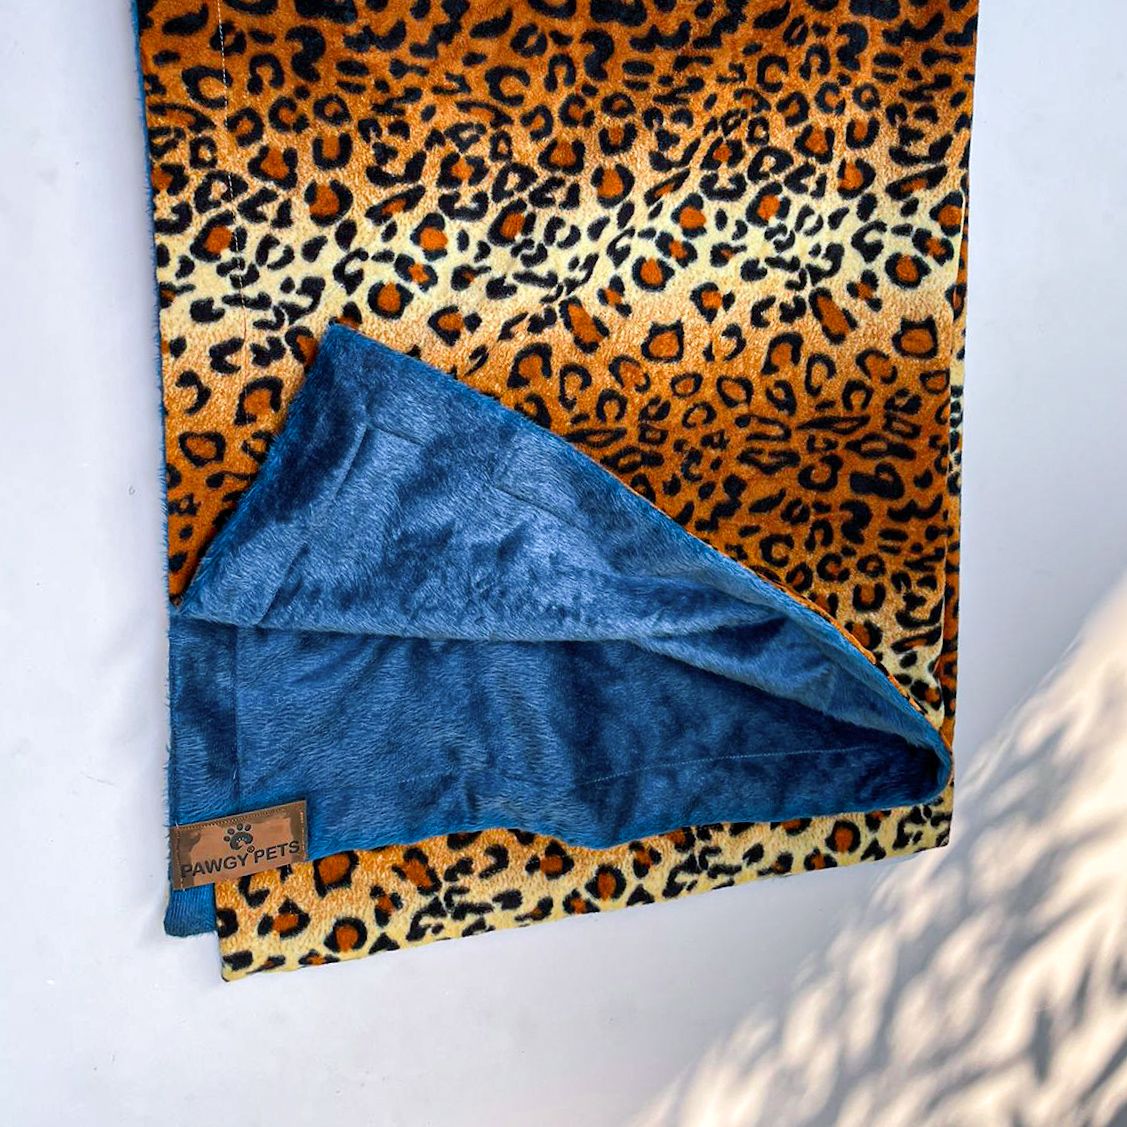 Pawgy Pets Personalised Furry Reversible Blanket For Pets -  Leopard print & blue (Customised) for Dogs & Cats